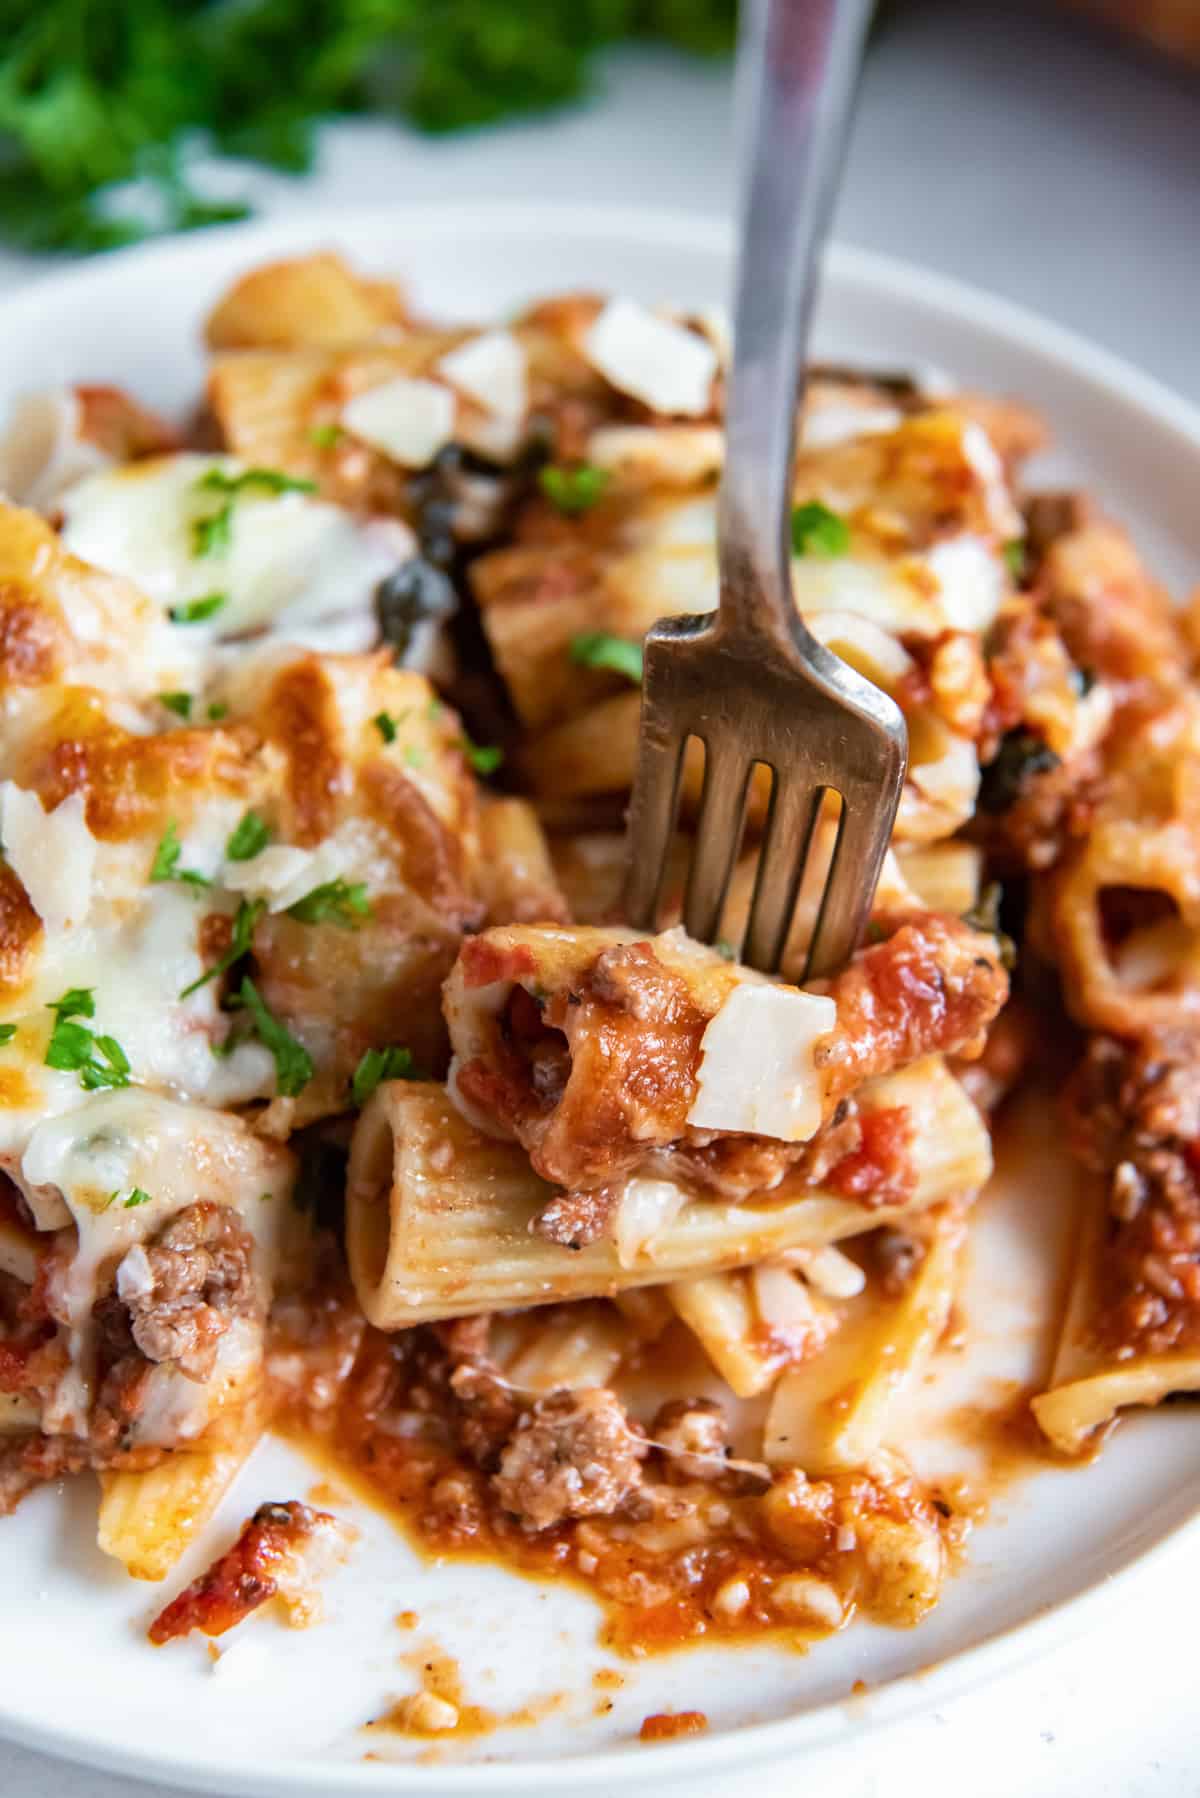 A fork piercing into pieces of rigatoni on a dinner plate.